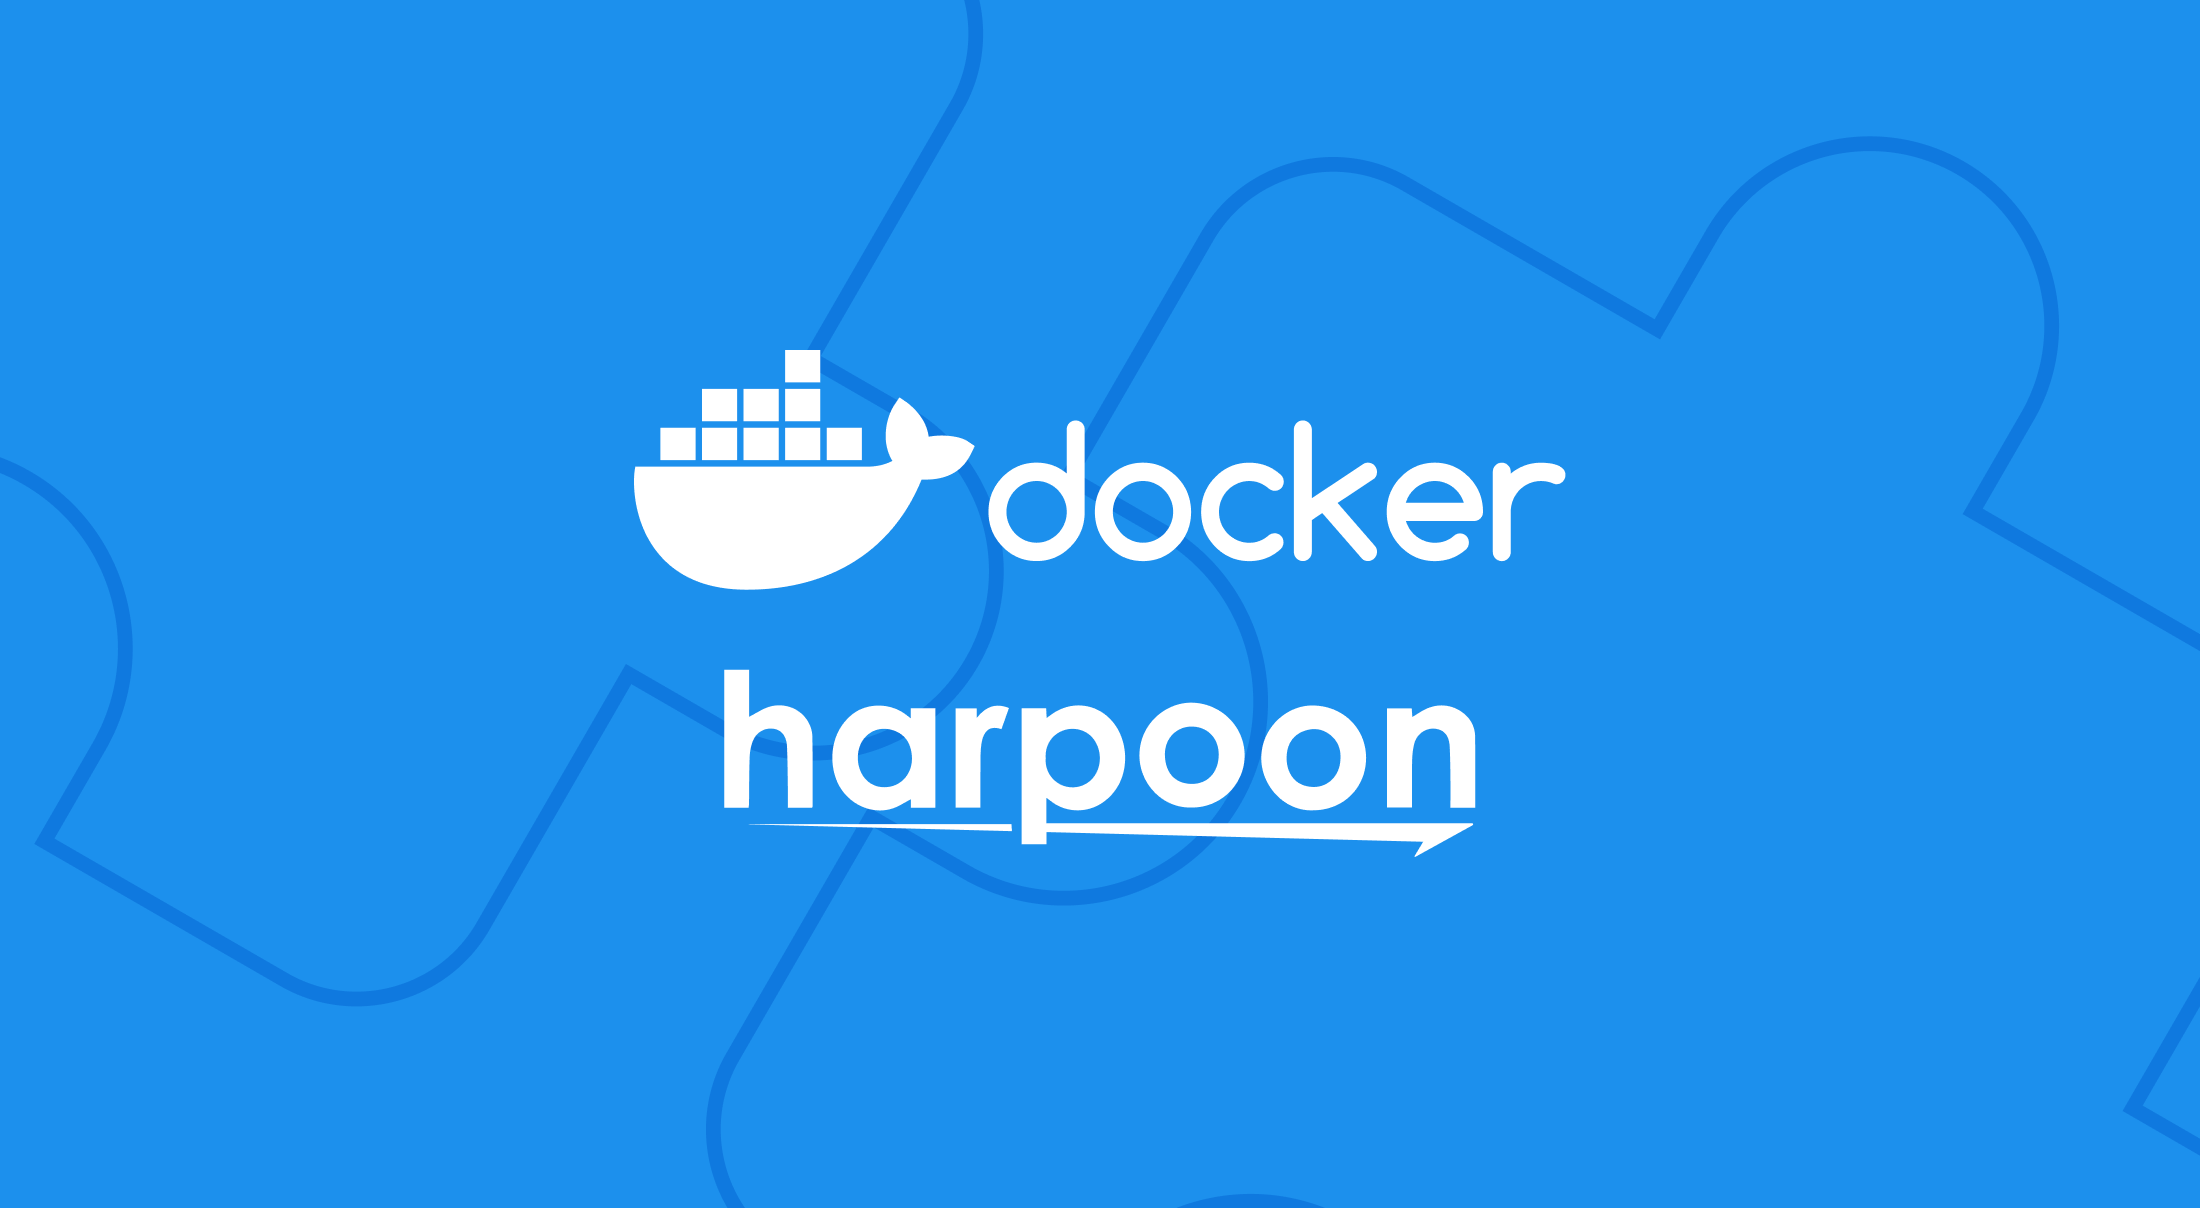 No-code deploy kubernetes with the harpoon docker extension.